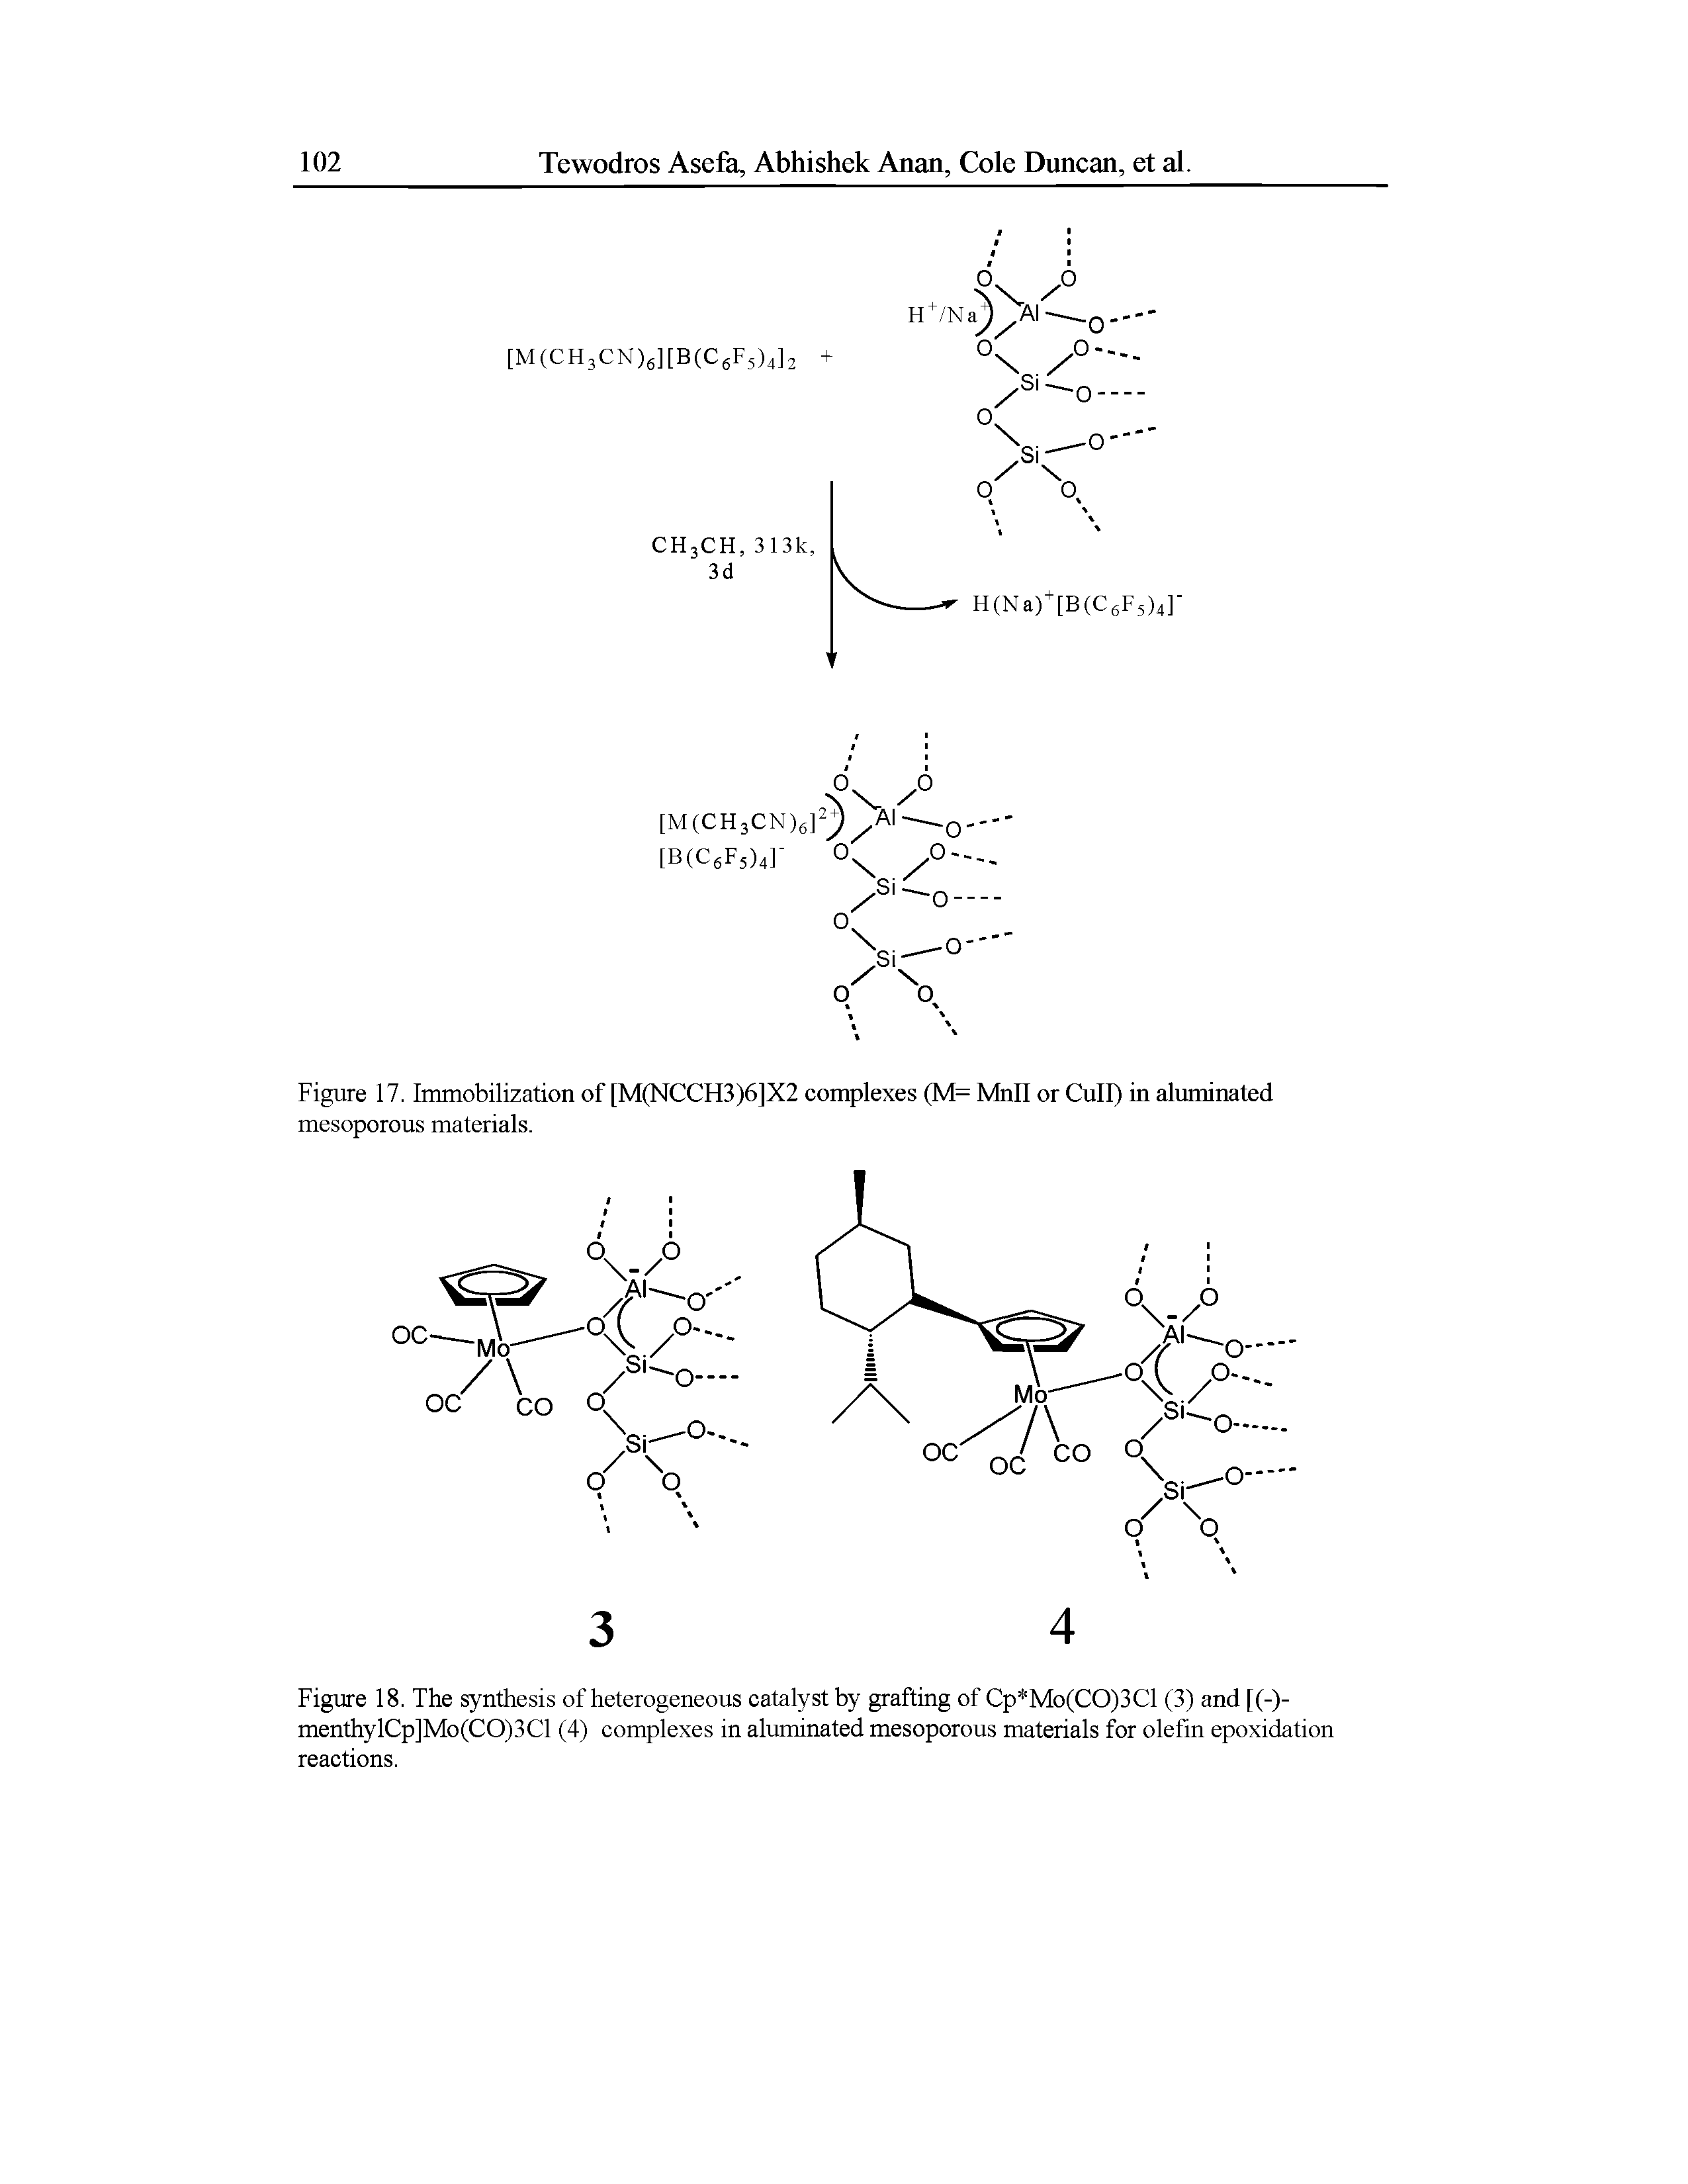 Figure 18. The synthesis of heterogeneous catalyst by grafting of Cp Mo(CO)3Cl (3) and [(-)-menthylCp]Mo(CO)3Cl (4) complexes in aluminated mesoporous materials for olefin epoxidation reactions.